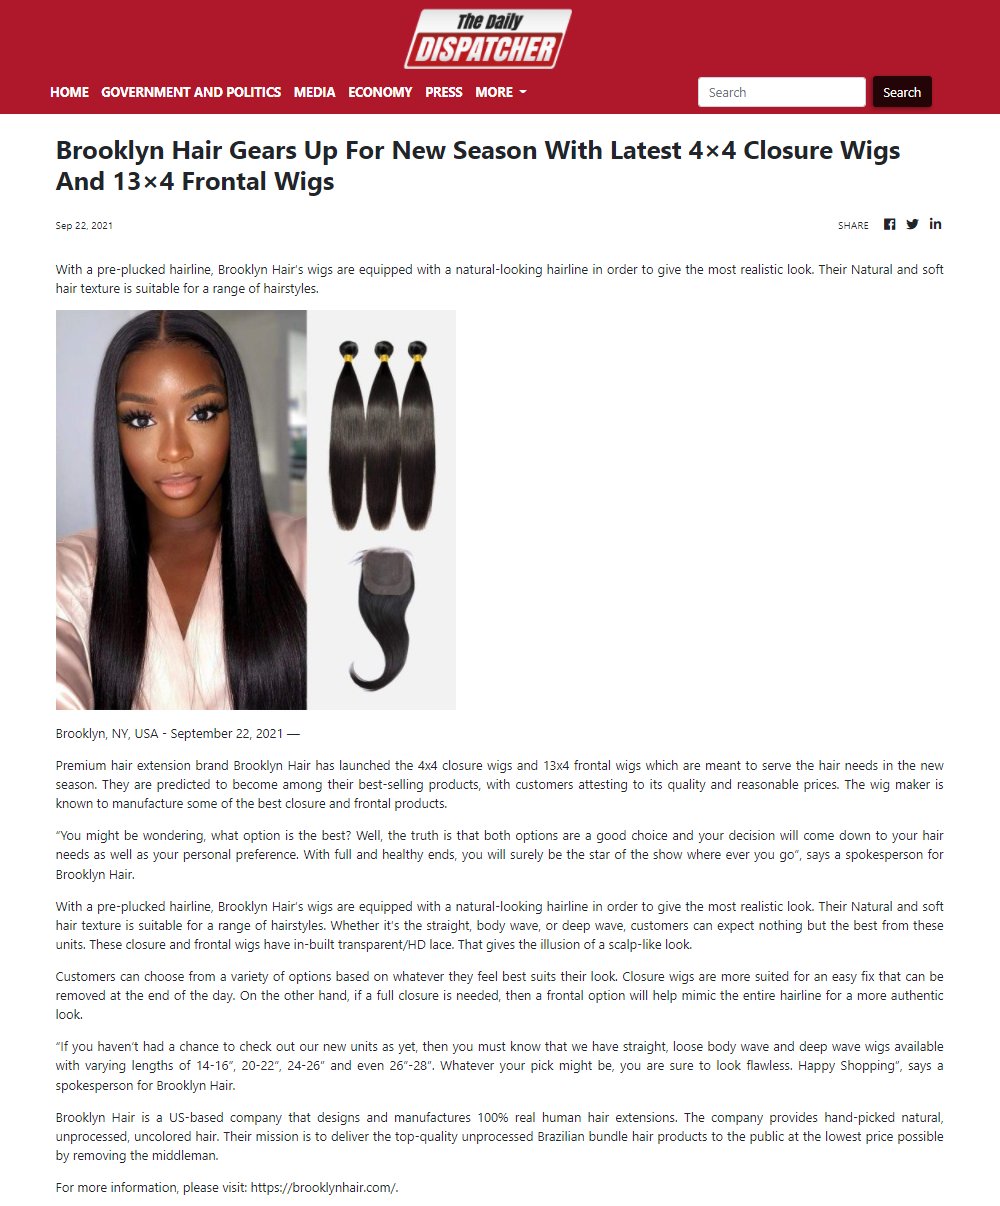 Brooklyn Hair Gears Up For New Season With Latest 4×4 Closure Wigs And 13×4 Frontal Wigs